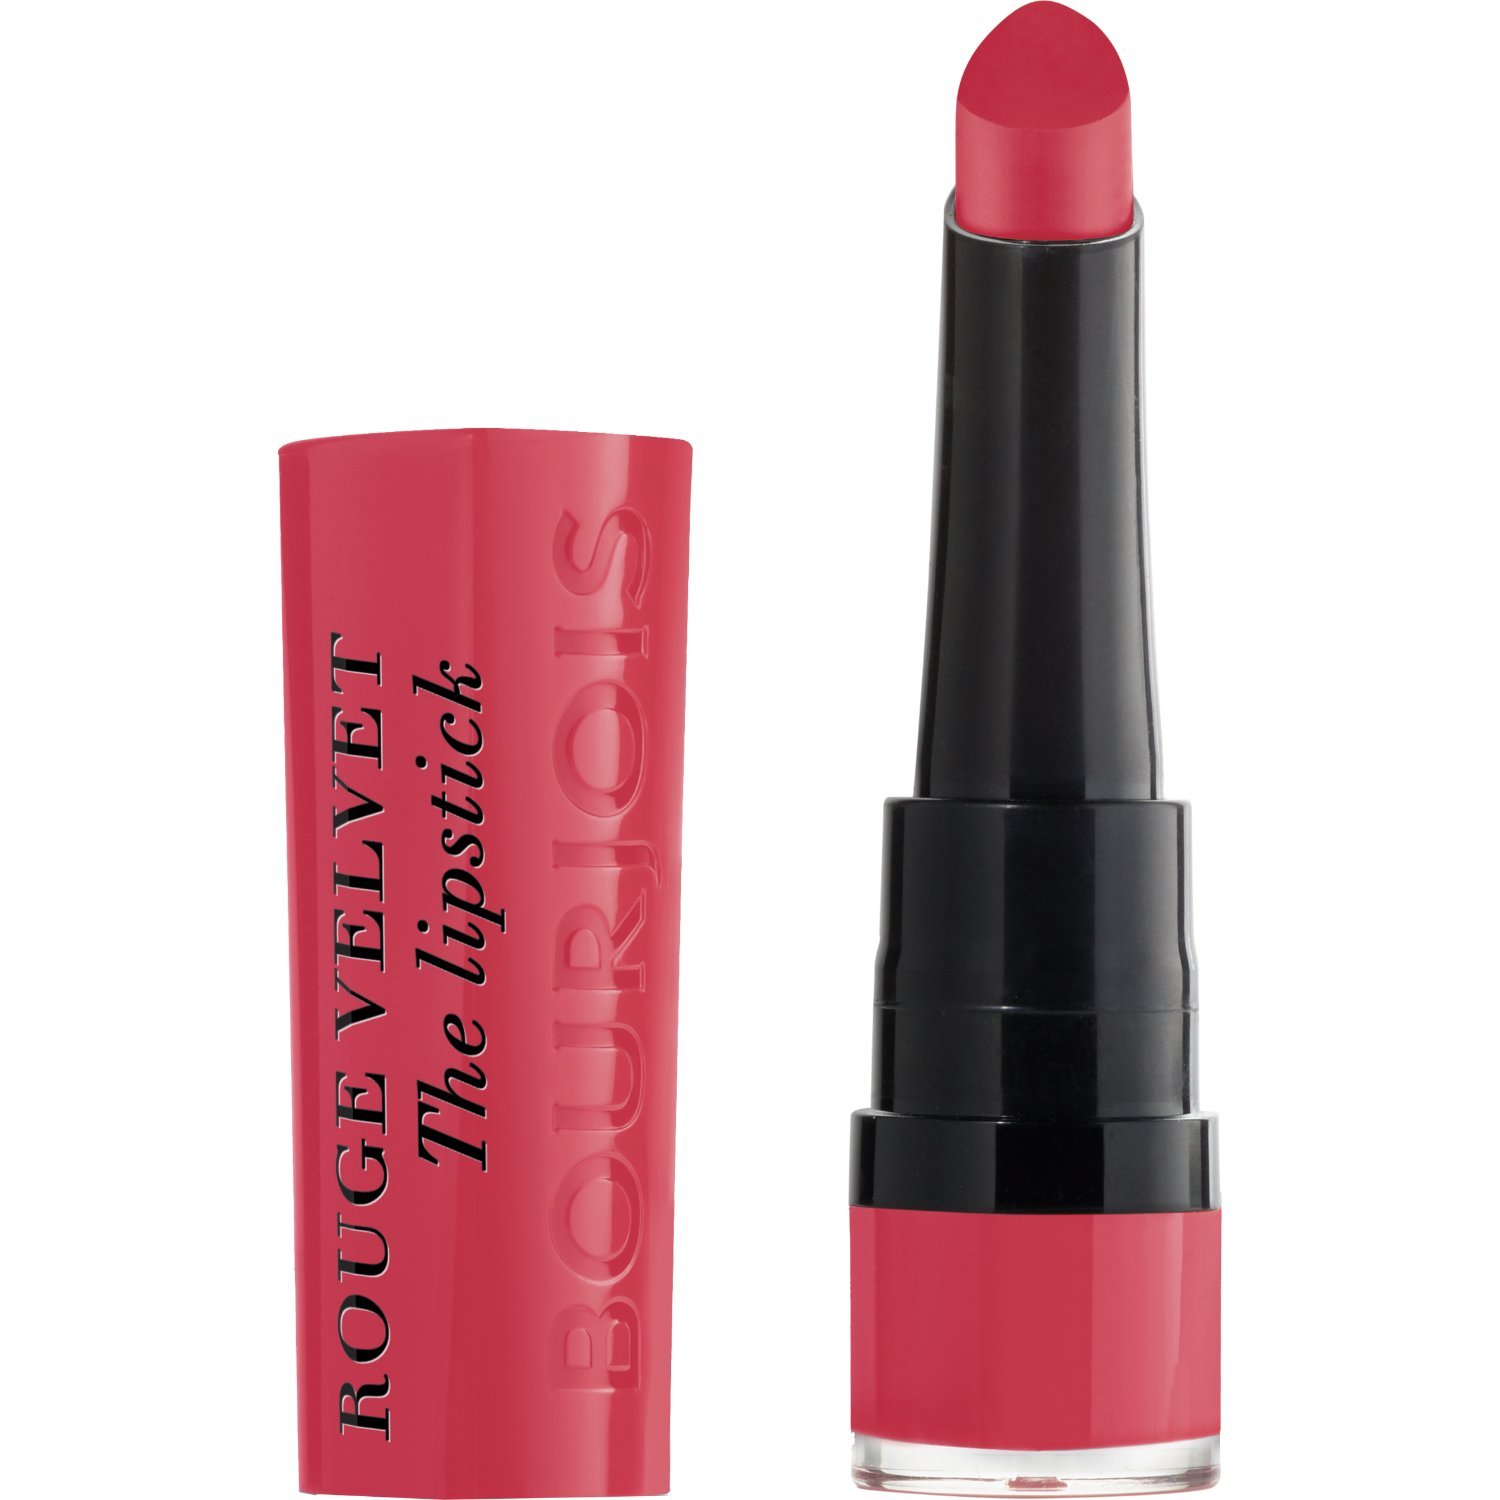 TOPFACE INSTYLE EXTREME MATTE LIP PAINT 003 Elghazawy Shop